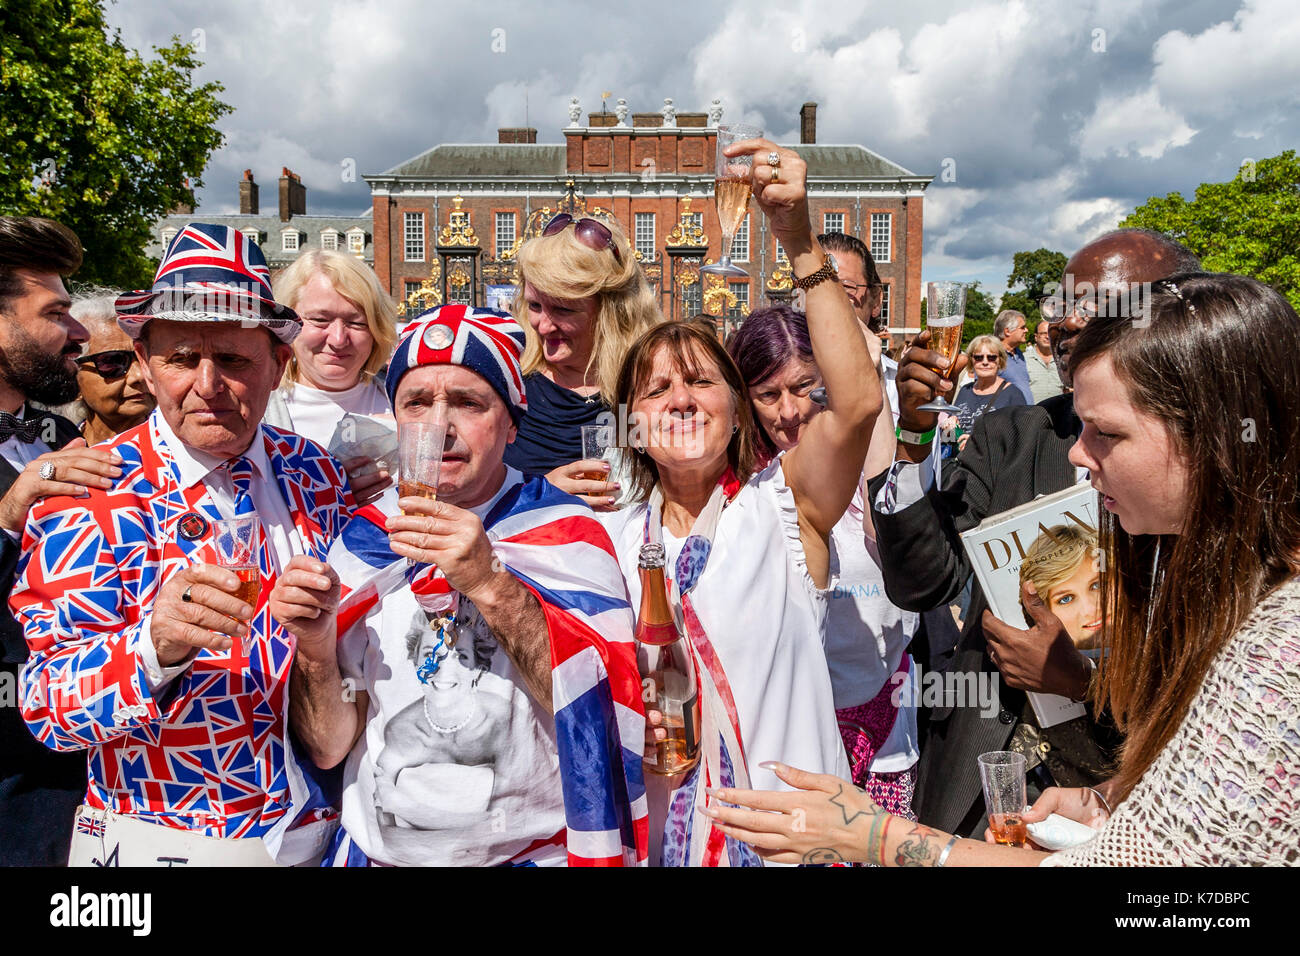 Supporters Of The Late Princess Diana Toast Her Memory With Glasses Of Champagne On The 20th Anniversary Of Her Death, Kensington Palace, London, UK Stock Photo